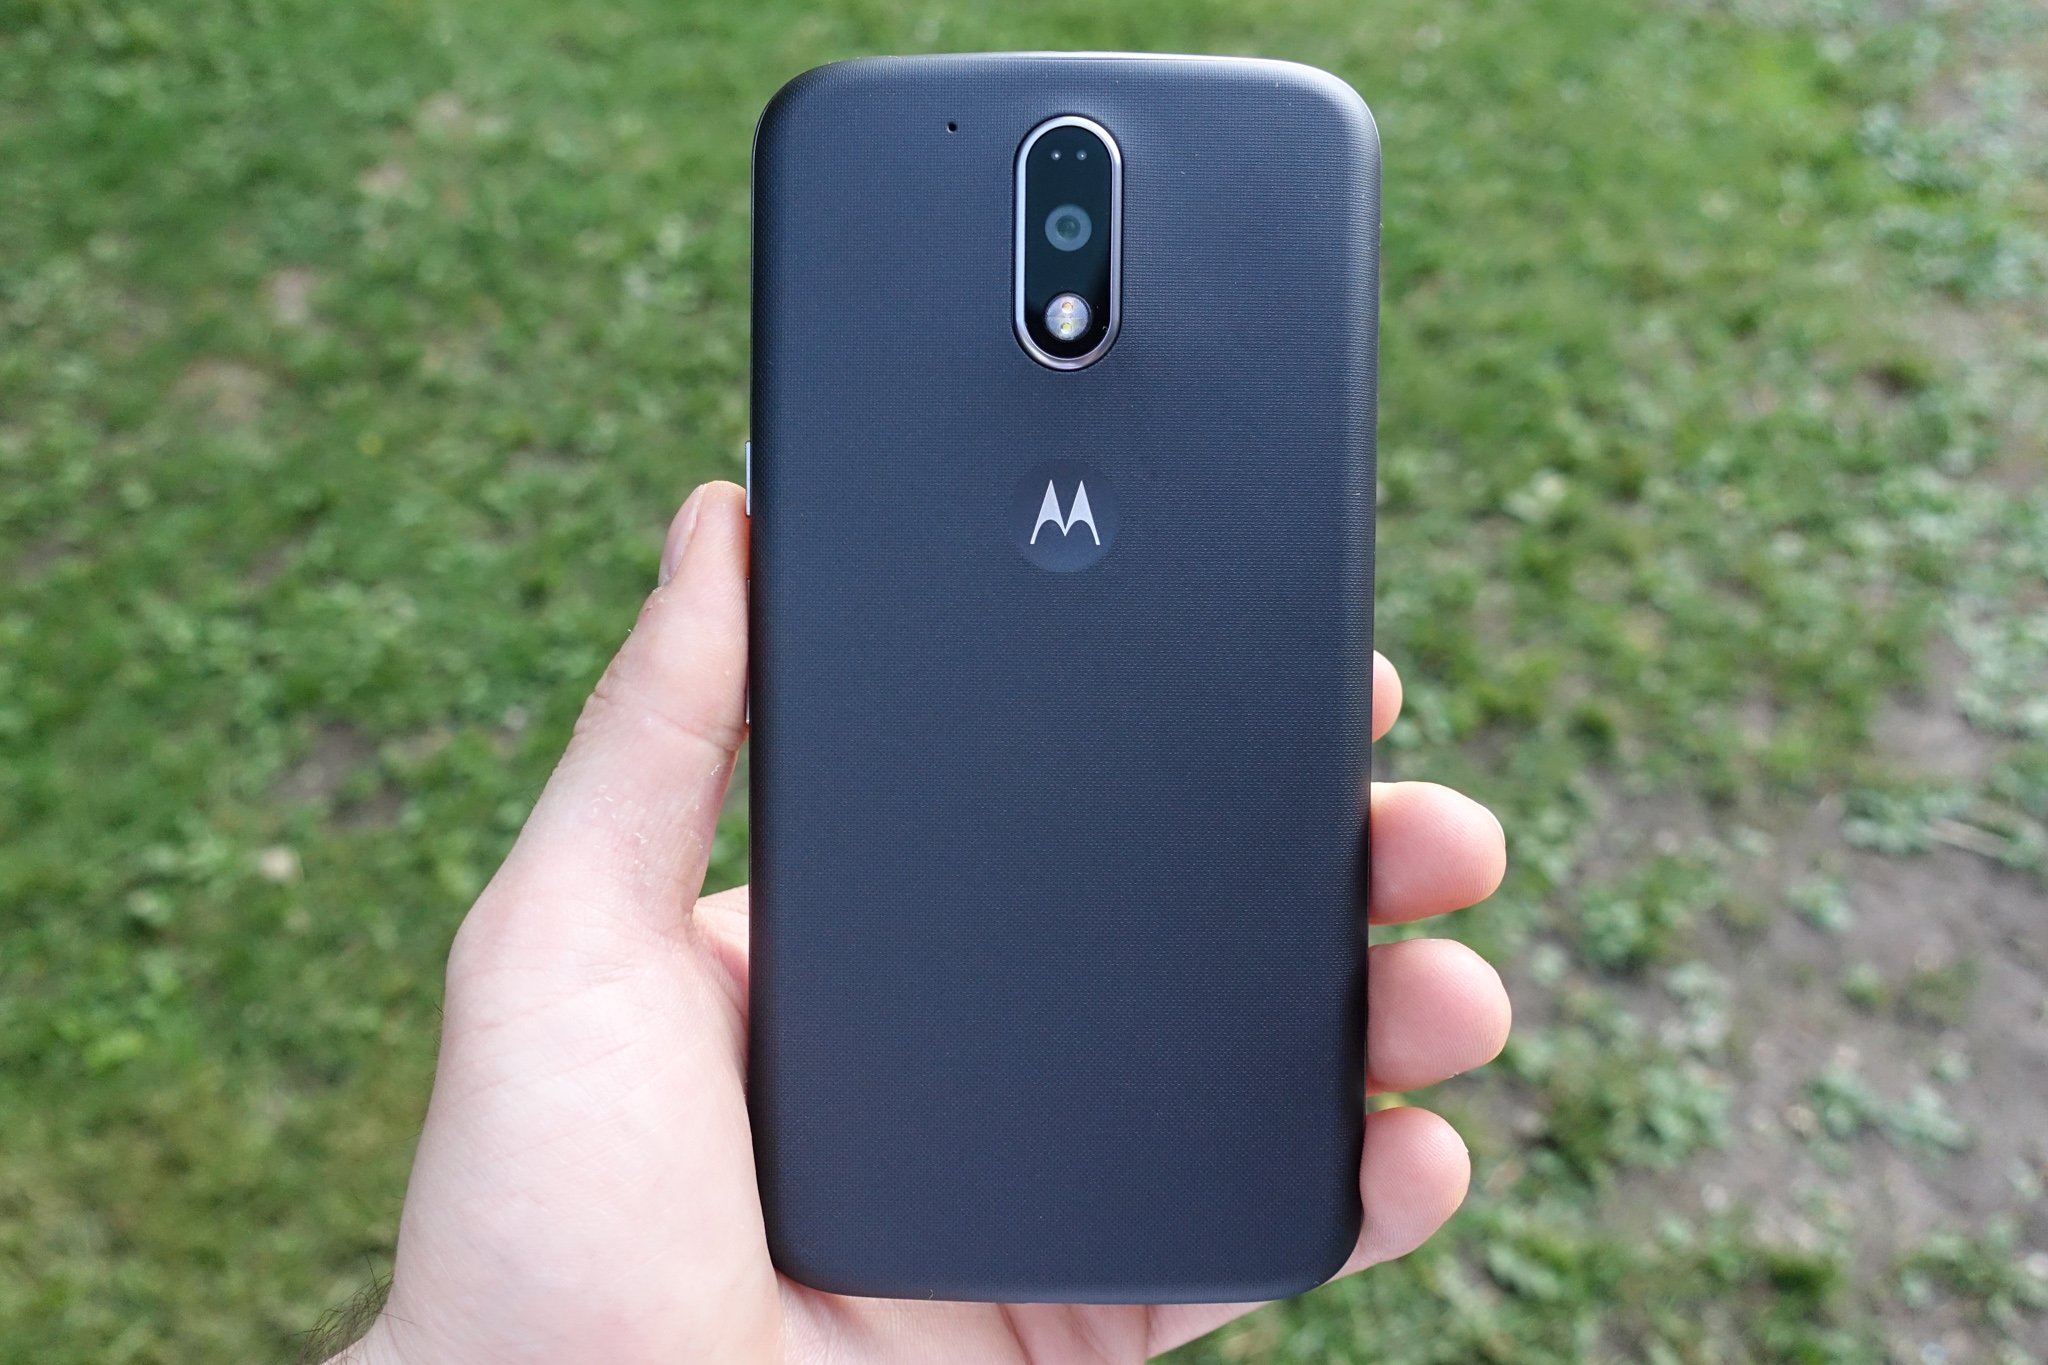 Common Moto G4 and G4 Plus problems and how to fix them